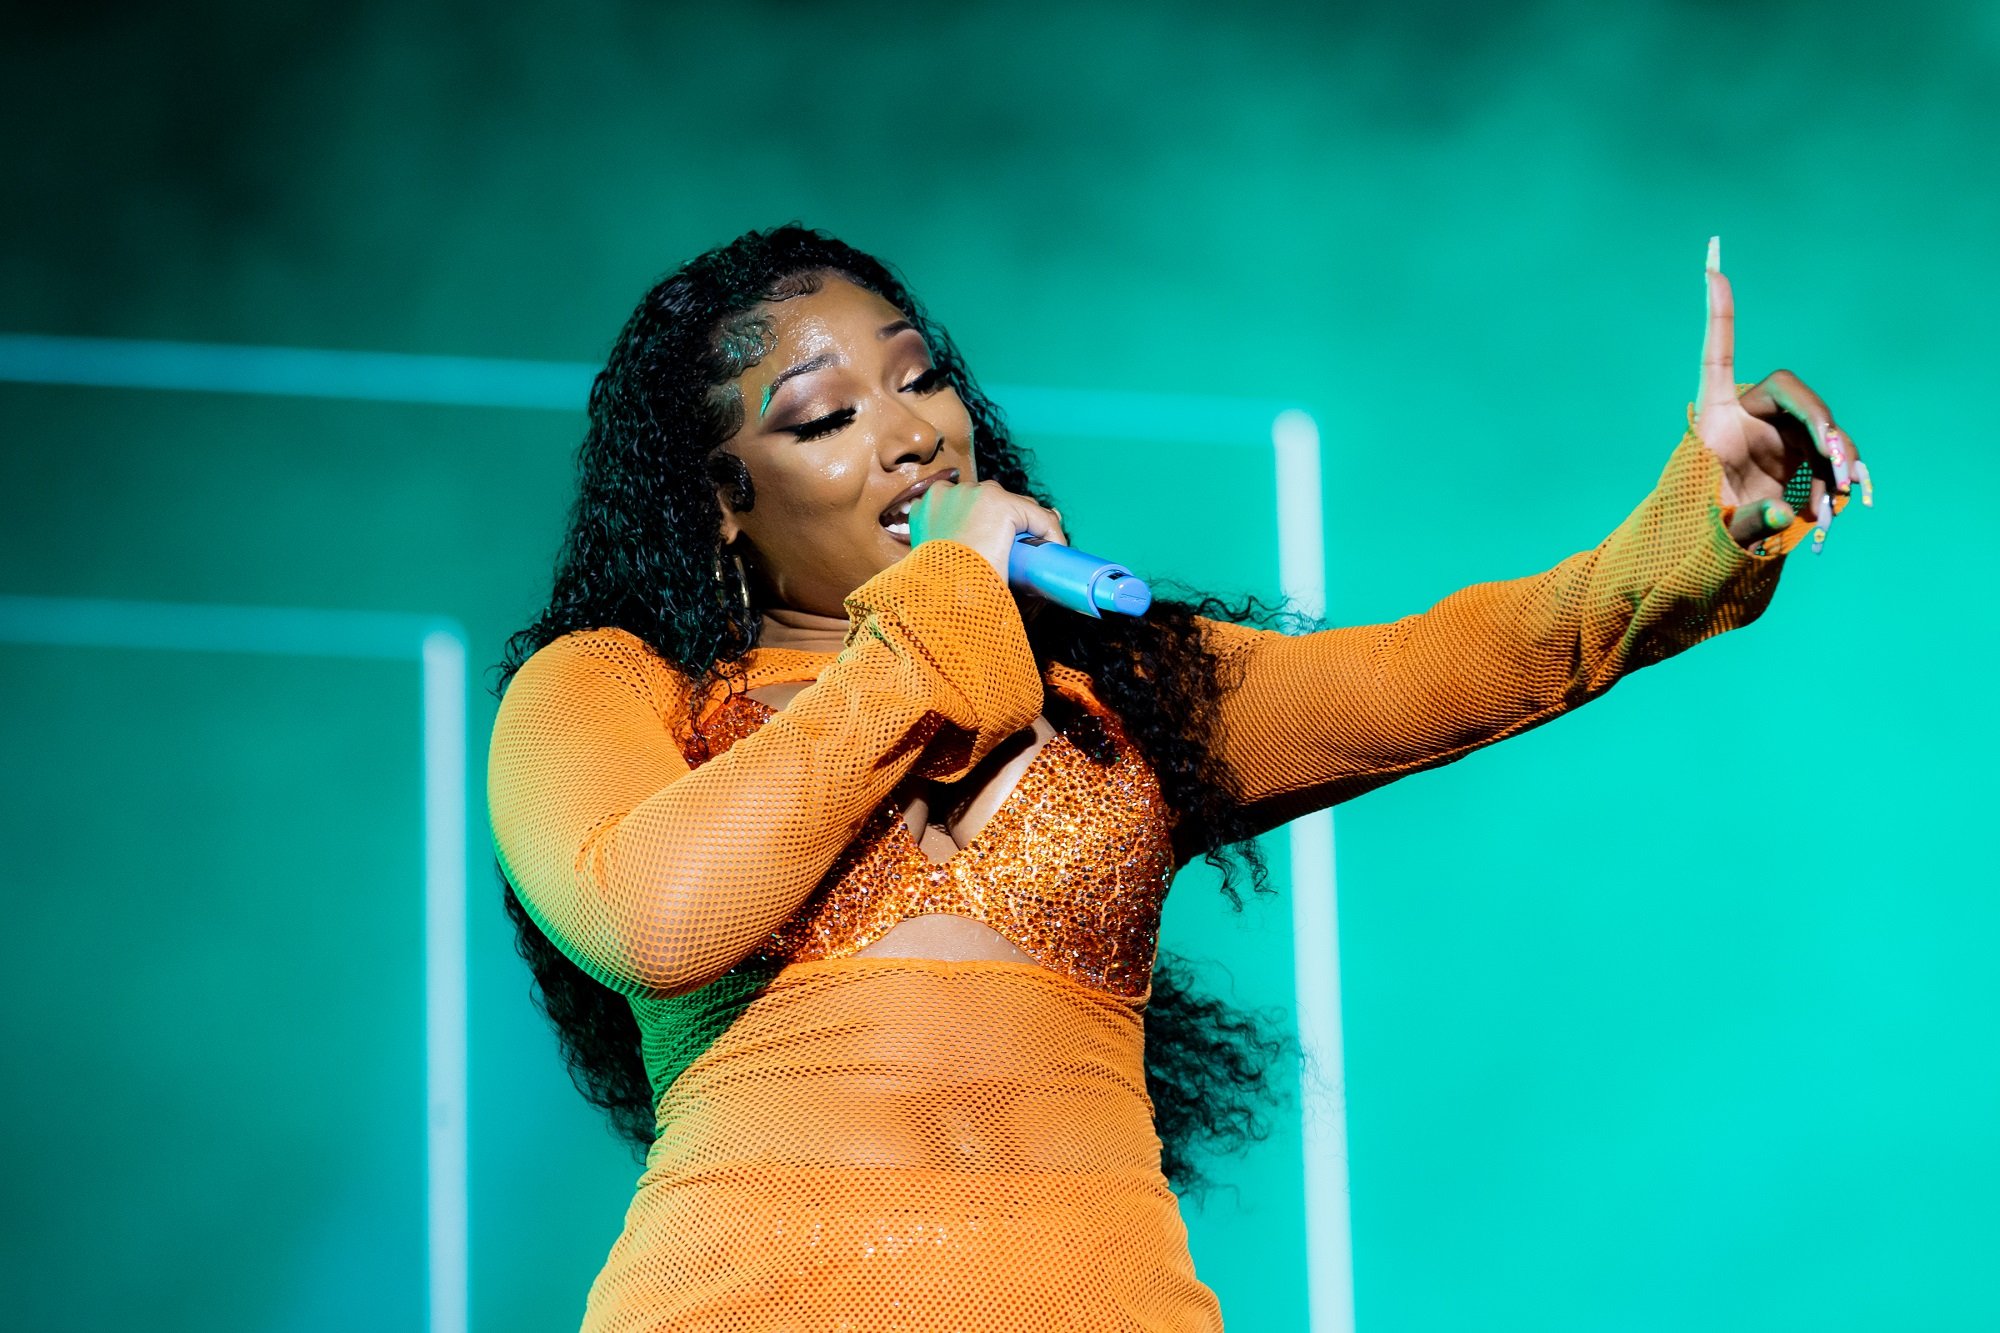 Megan Thee Stallion performing on stage in a bright orange outfit